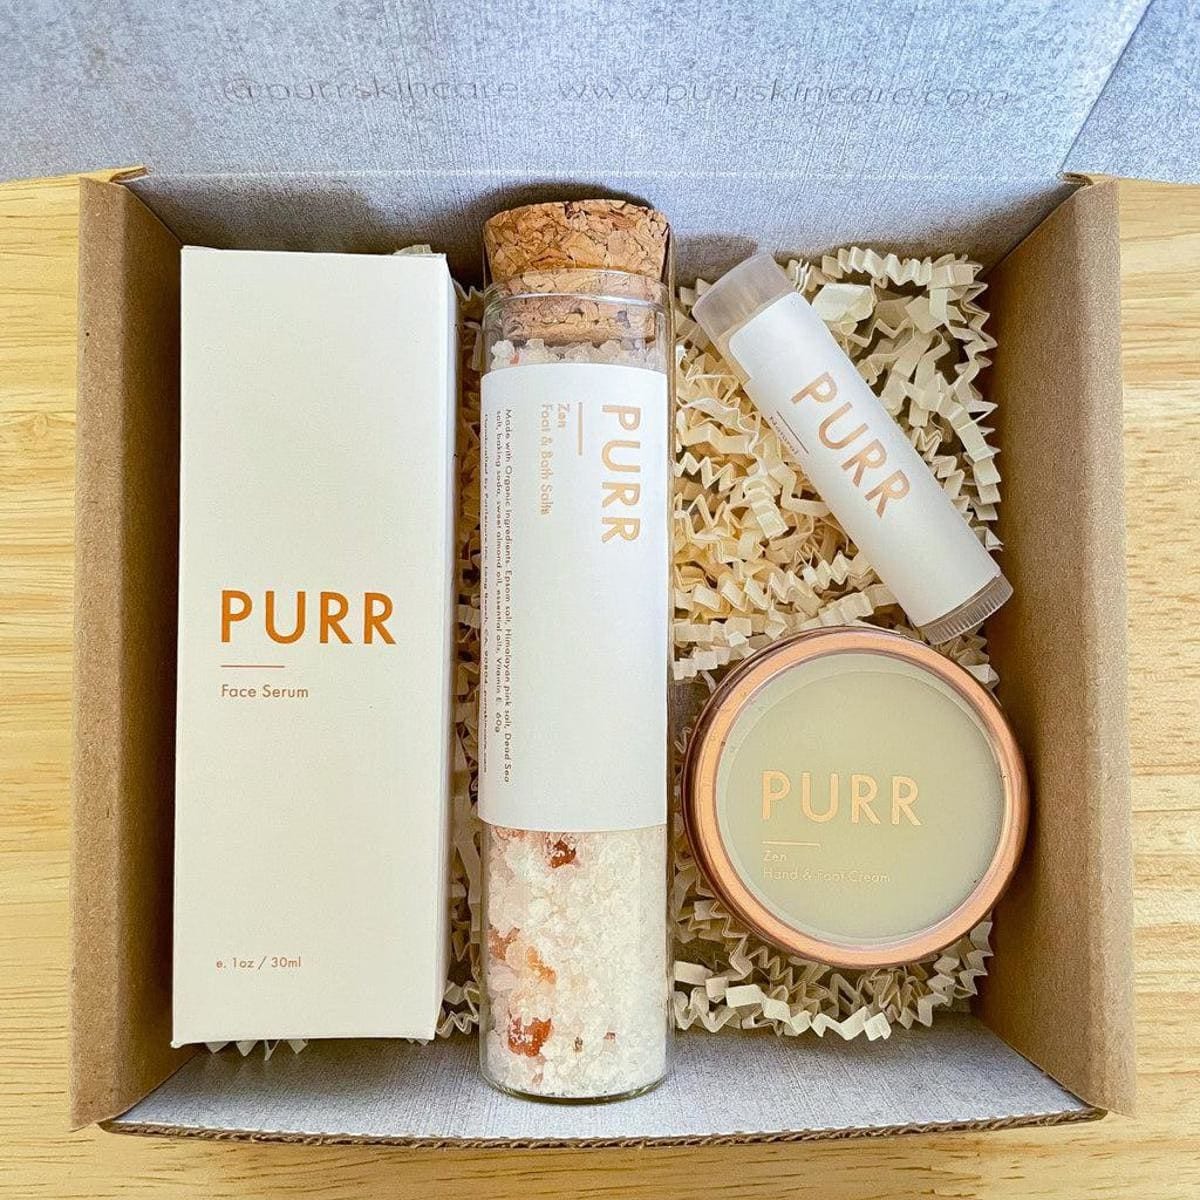 Purrleisure Kit Gift Set by PURR Skincare